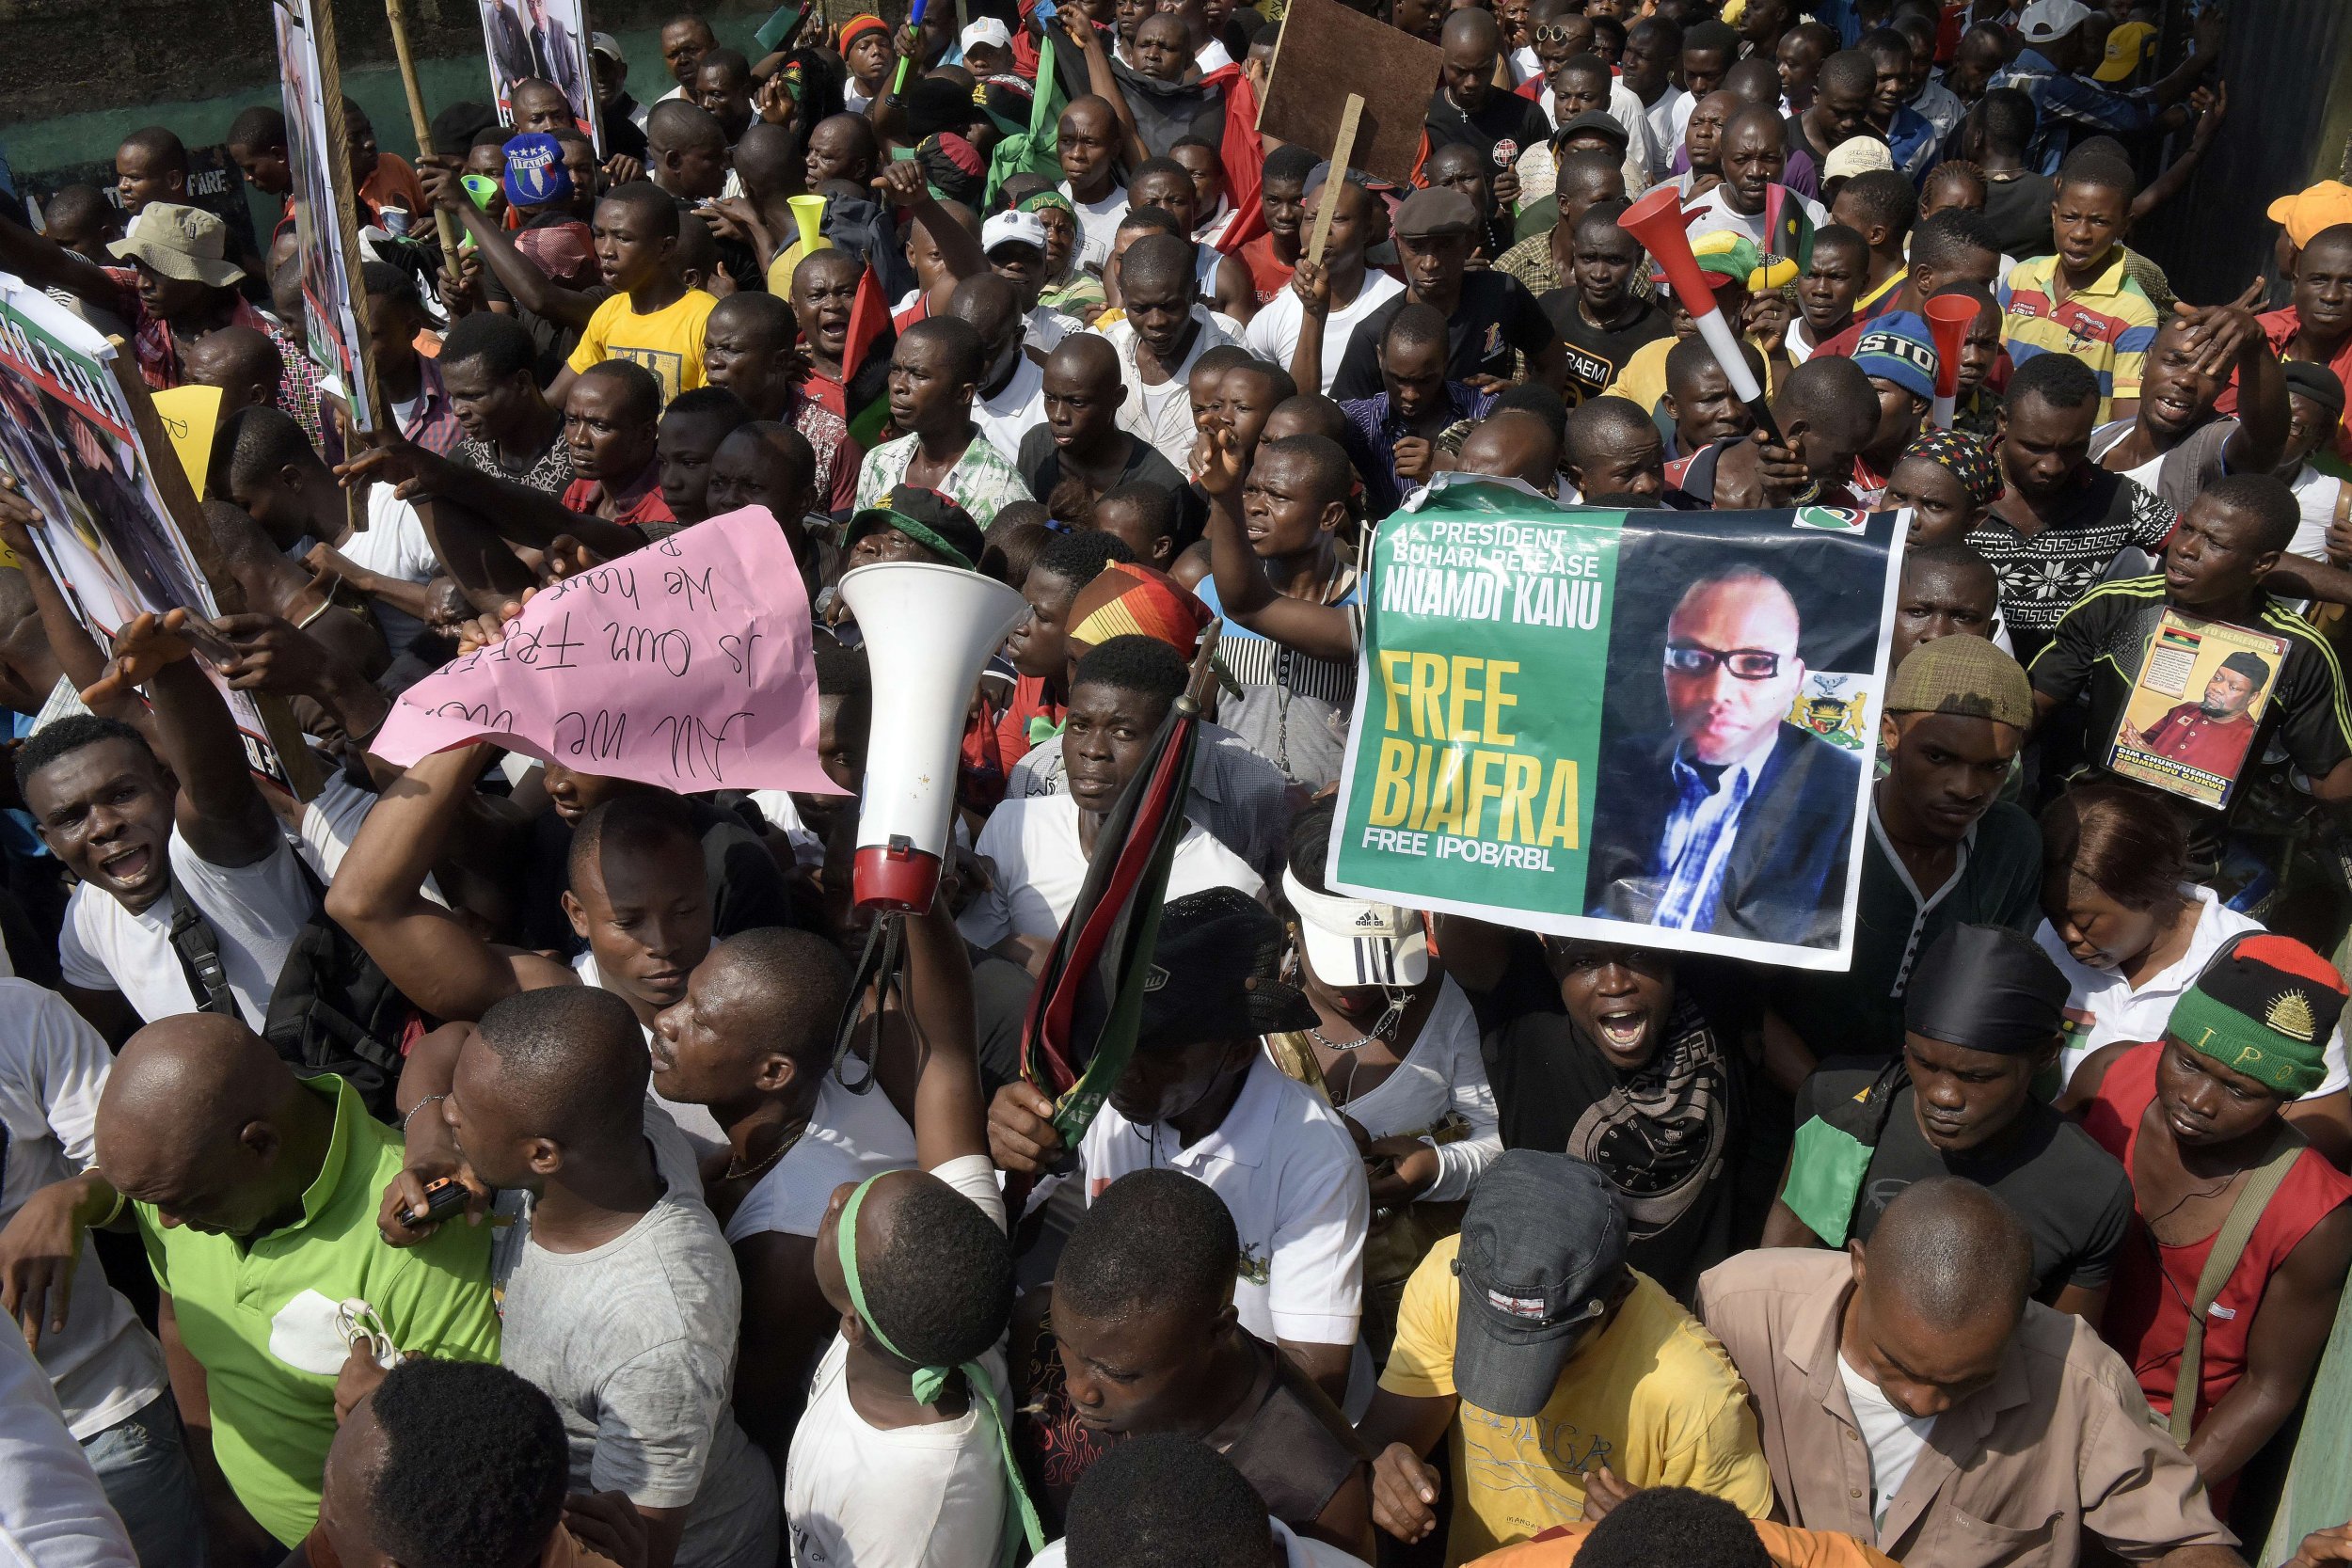 Pro-Biafra supporters call for Nnamdi Kanu's release in Nigeria.